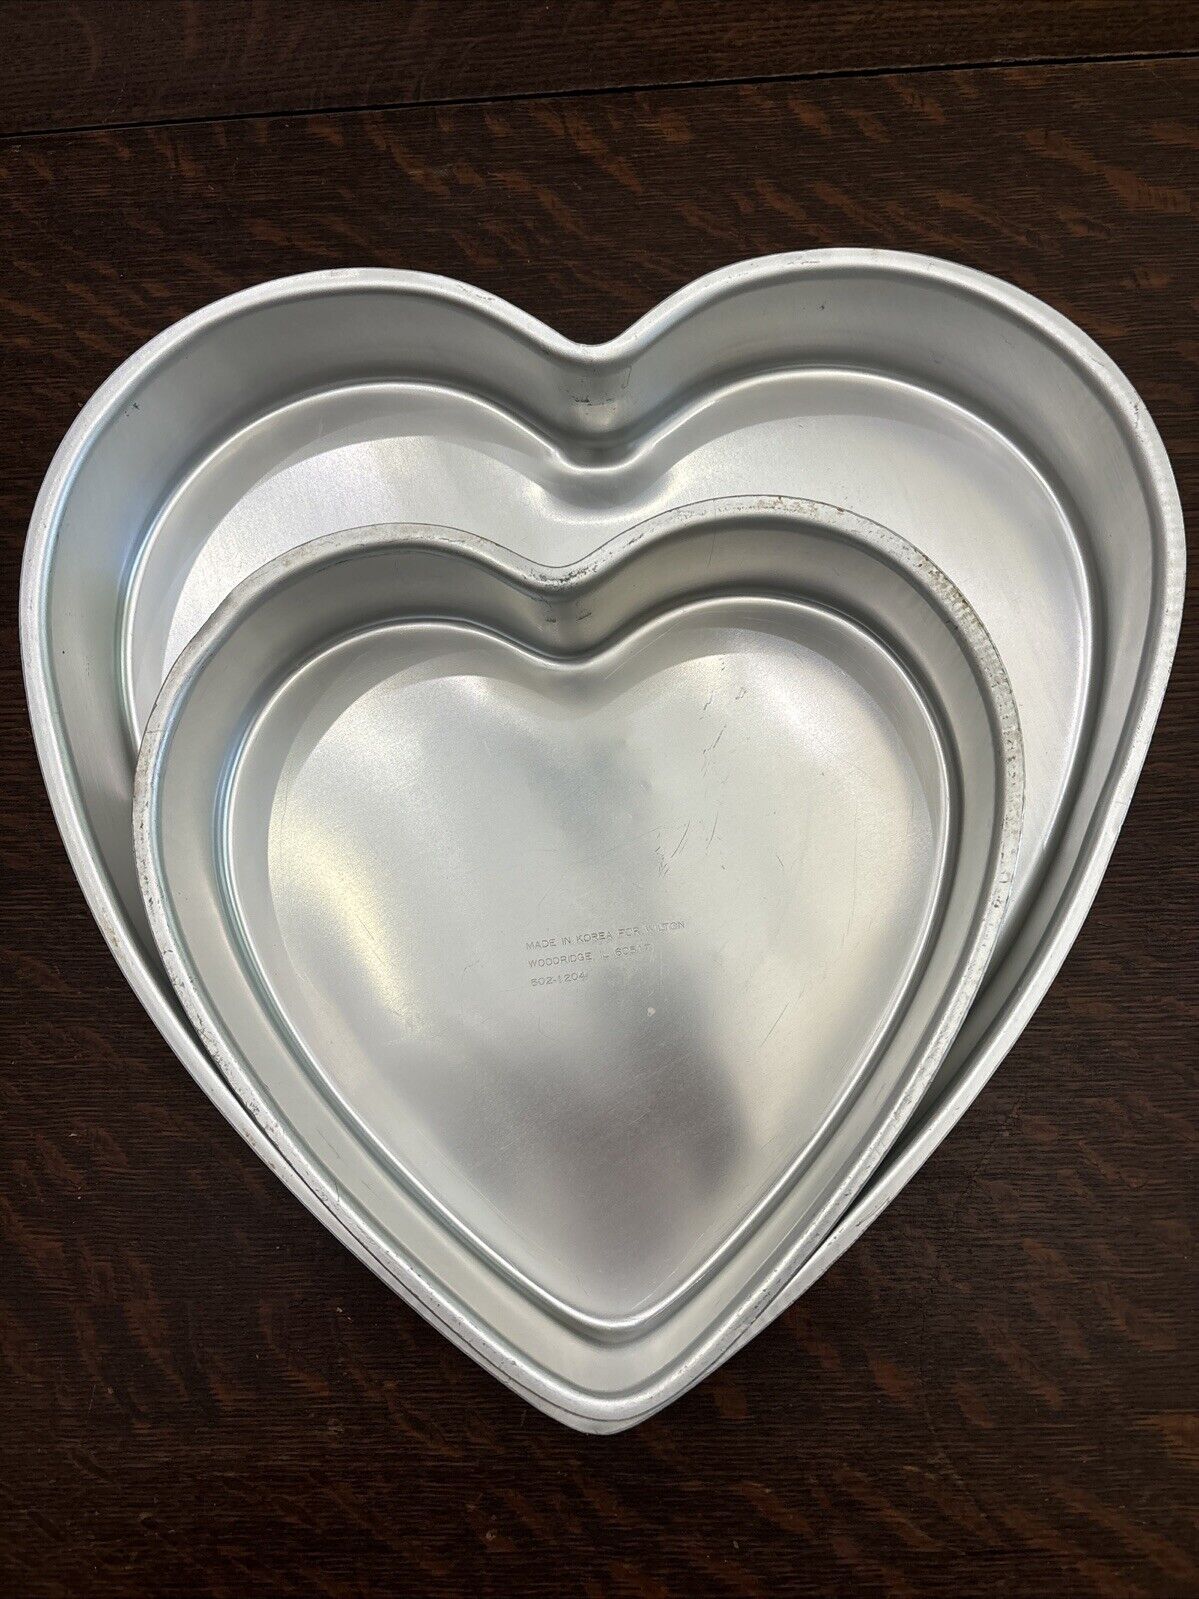 Vintage 1982 Lot of 2 Wilton Heart Cake Pans #502-1204 & 502-1298 Preowned